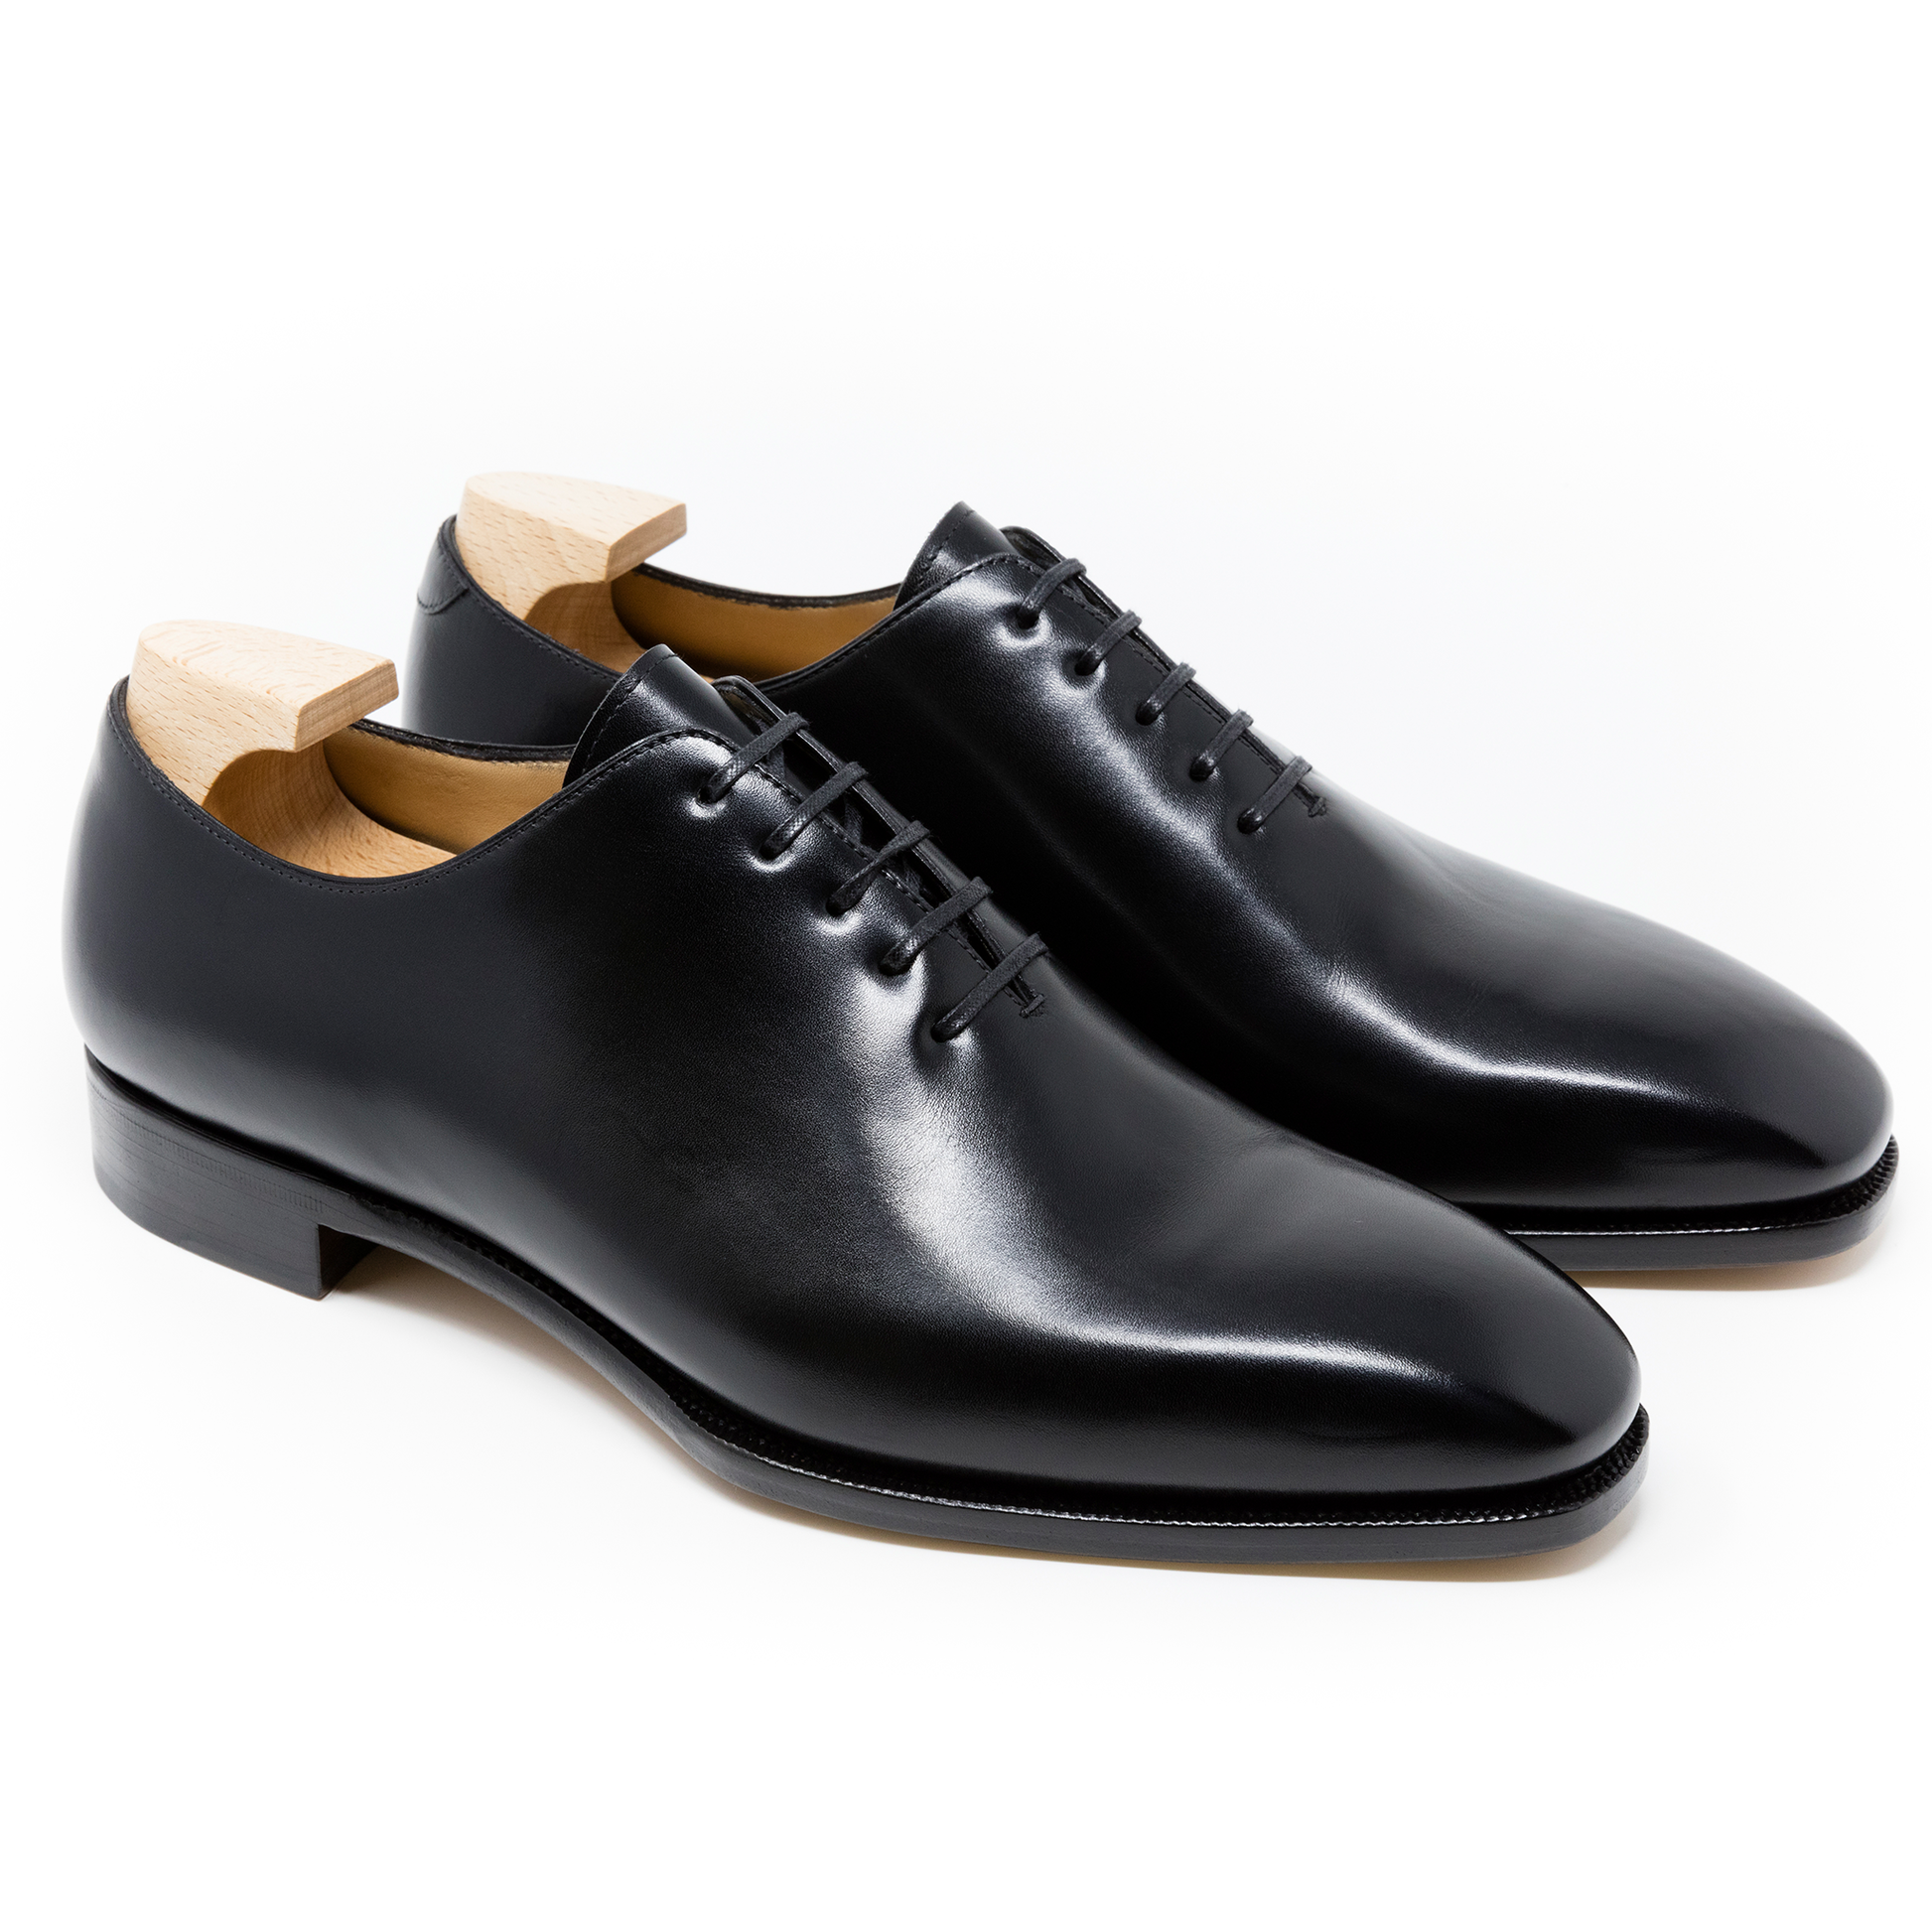 TLB Mallorca leather shoes 108 / PICASSO /BOXCALF BLACK